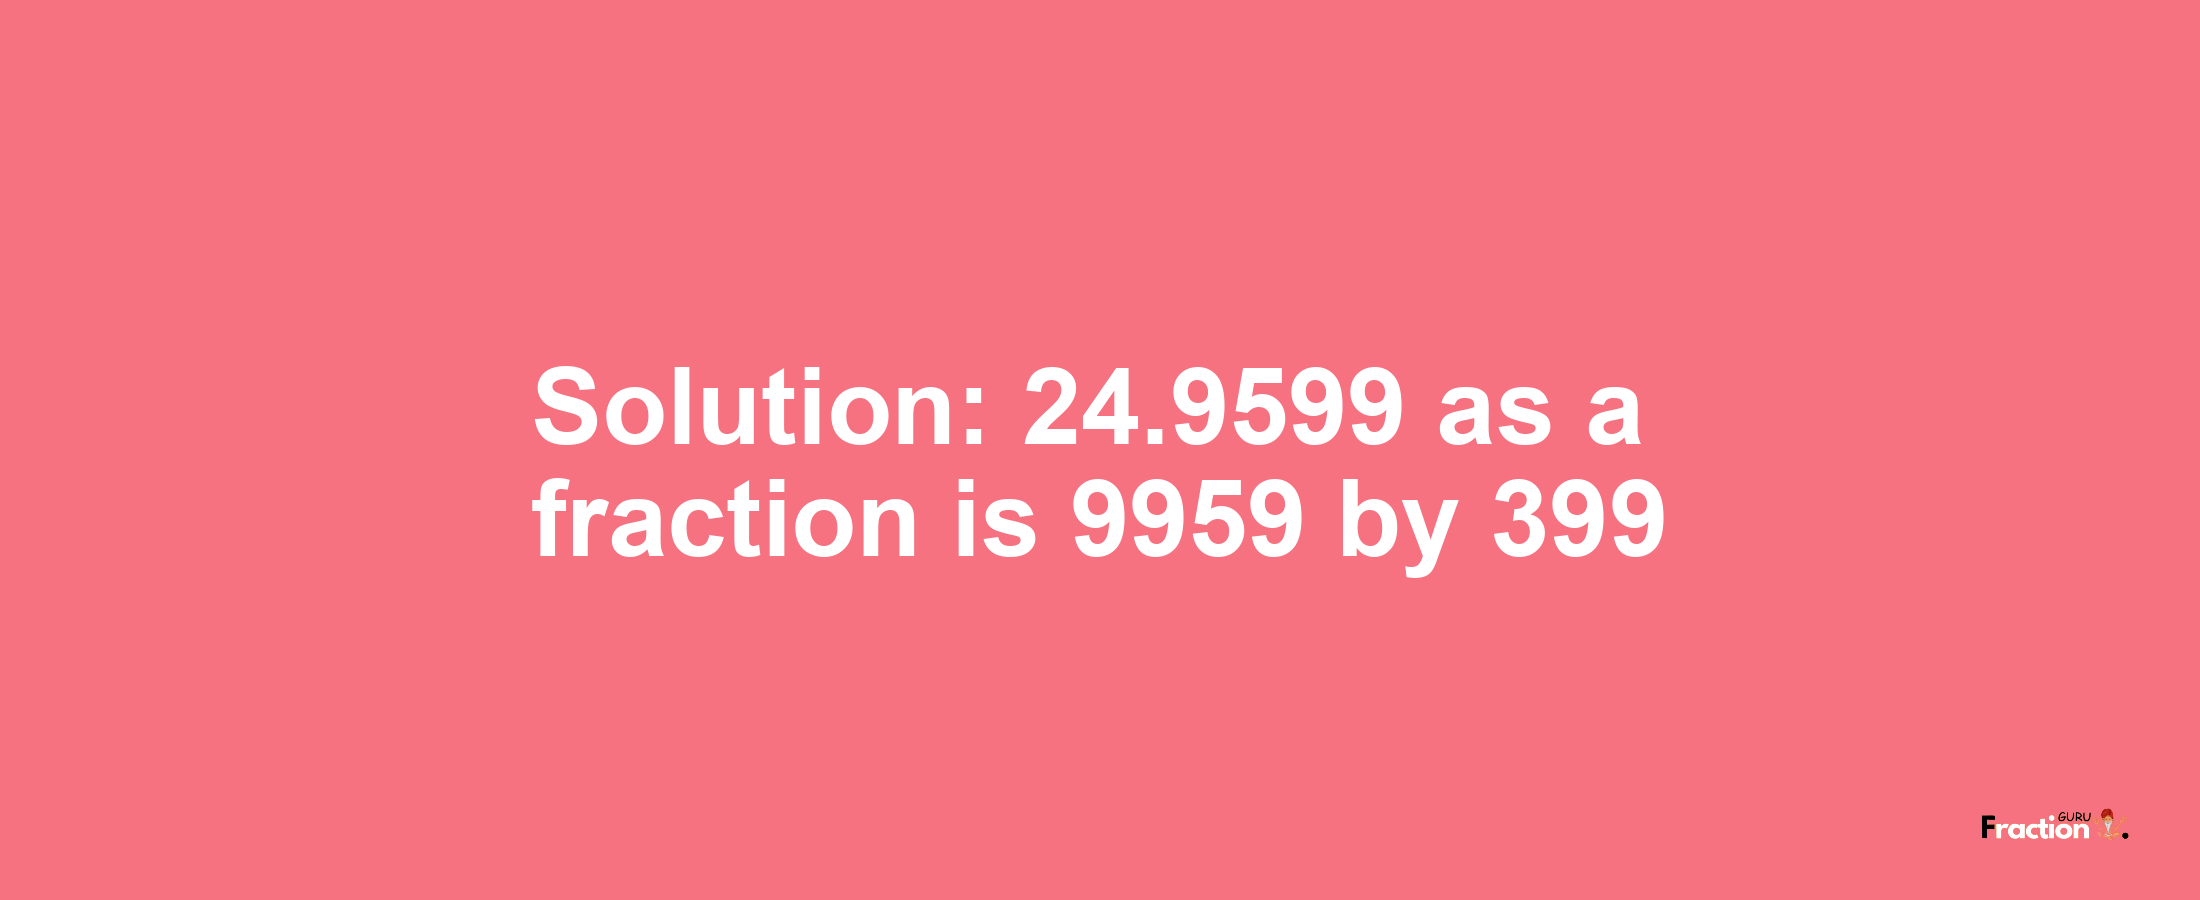 Solution:24.9599 as a fraction is 9959/399